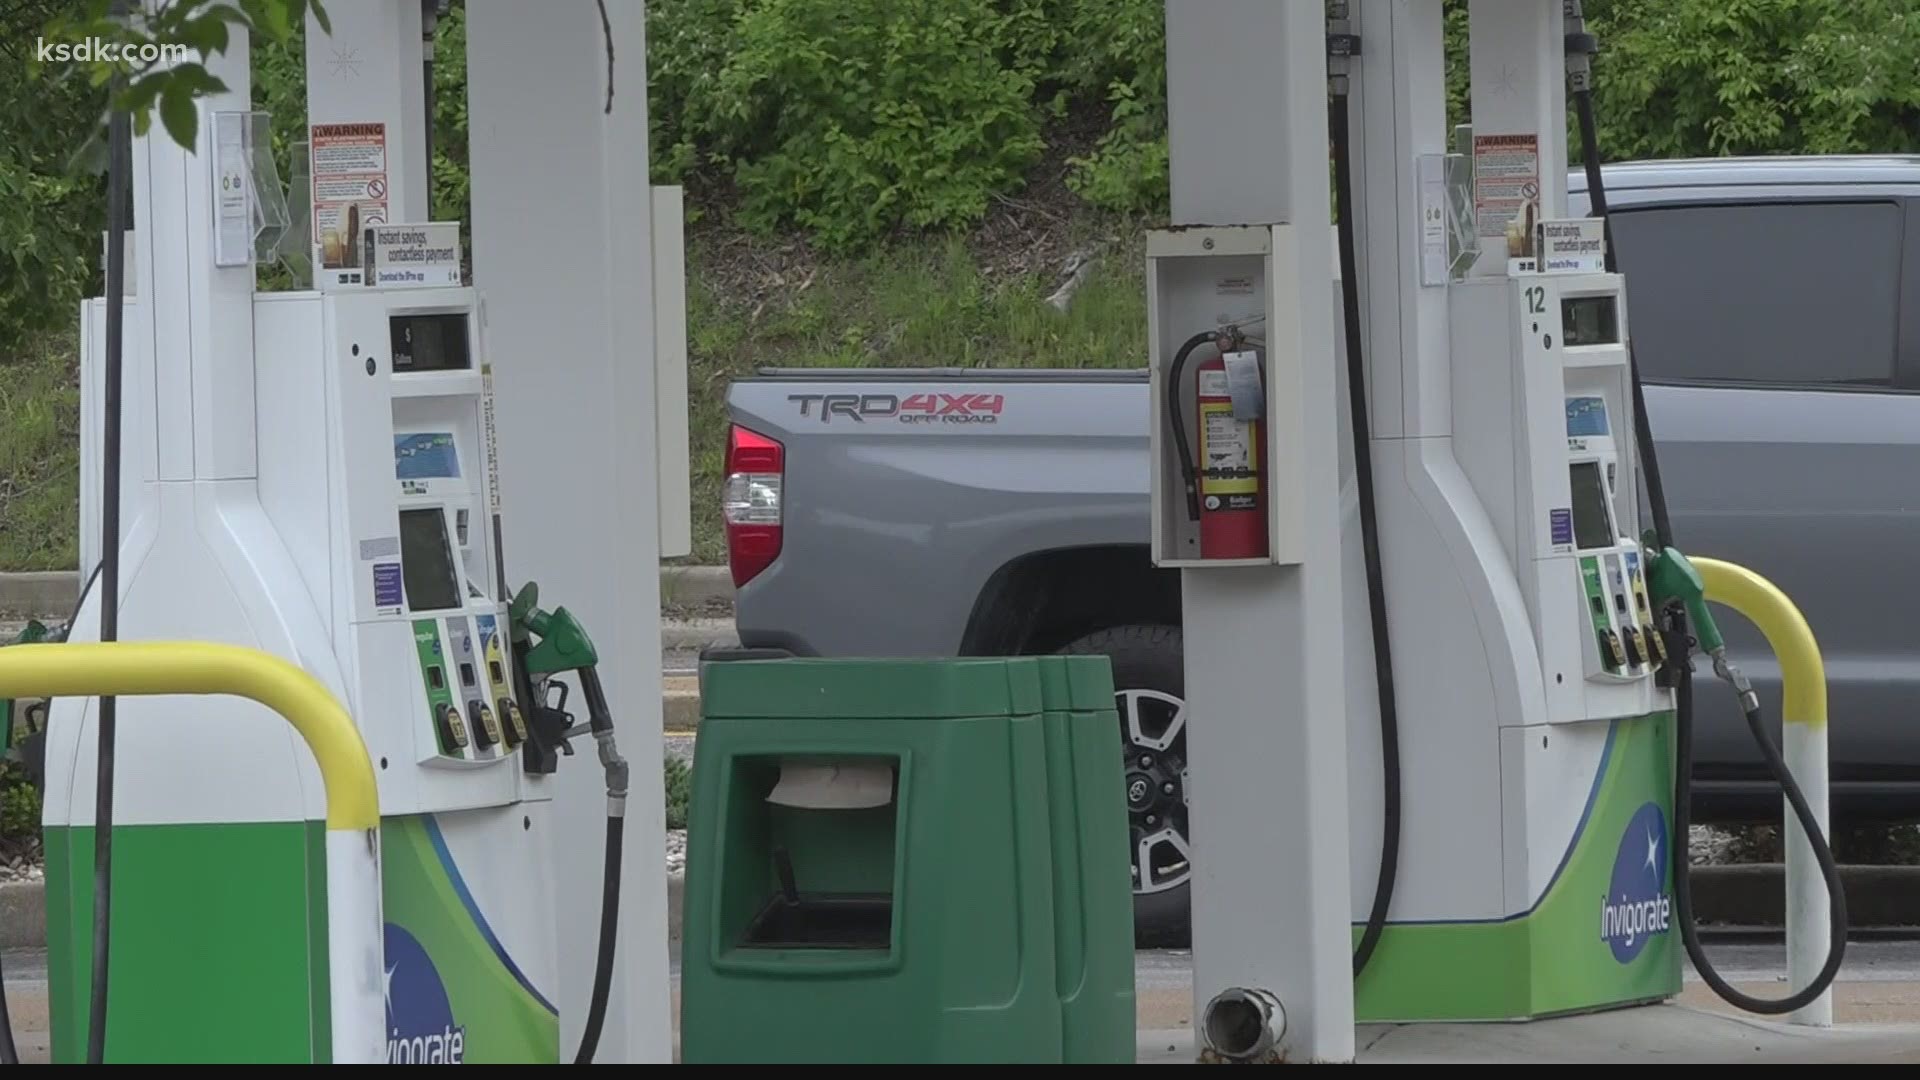 Lawmakers are considering a bill to increase the state's gasoline tax, the first such increase in 25 years